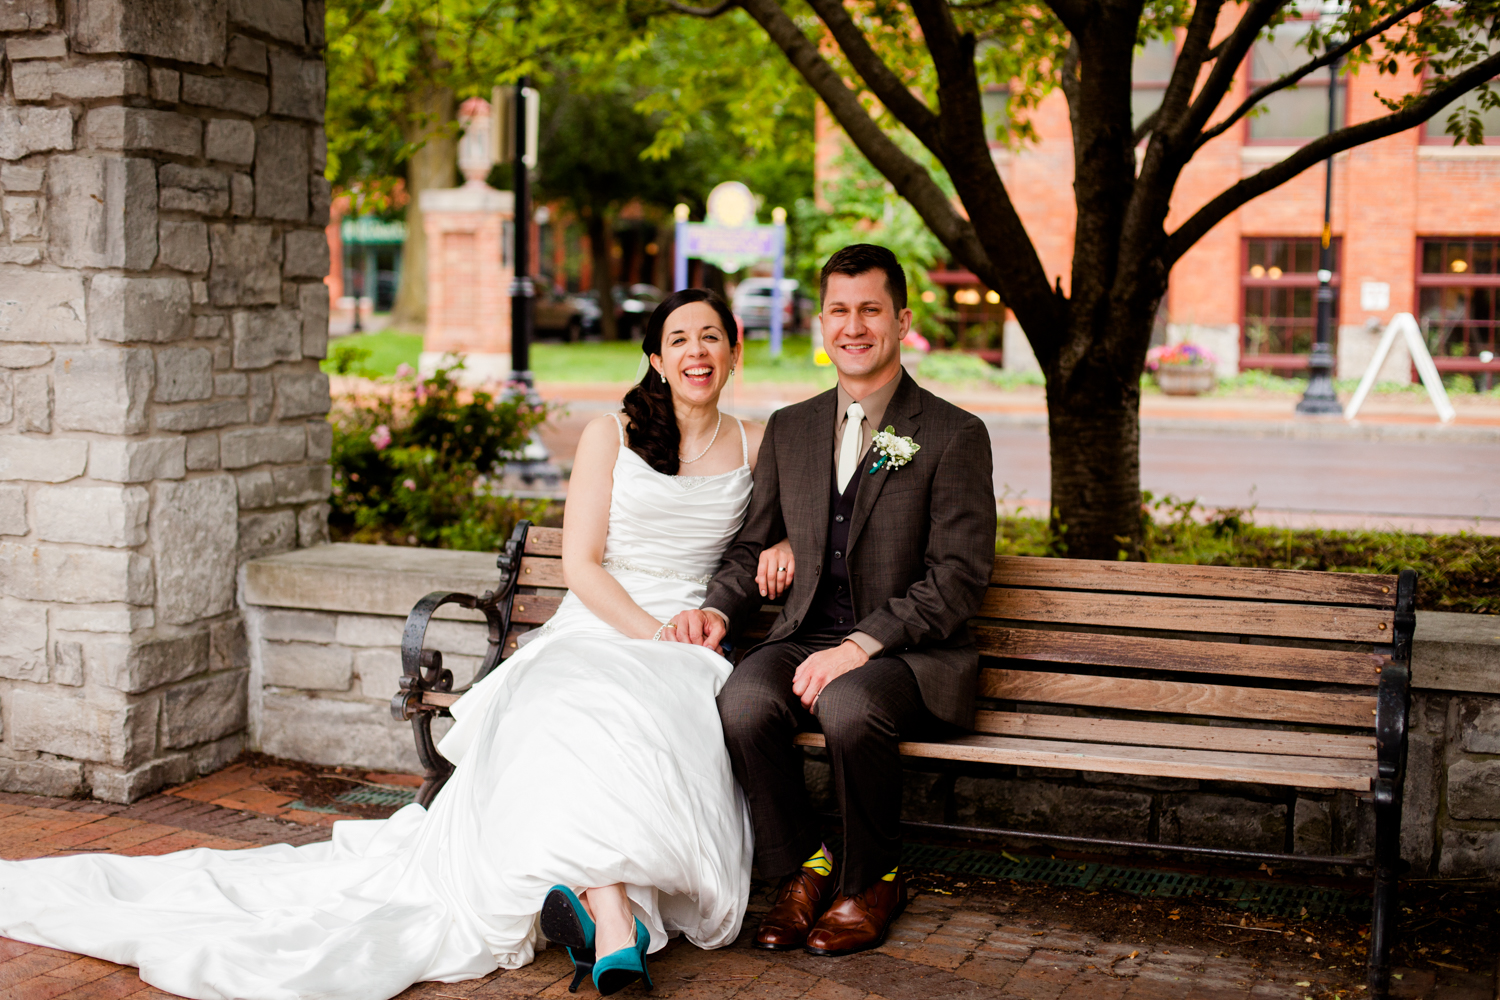  Bride and groom sit on bench laughing 